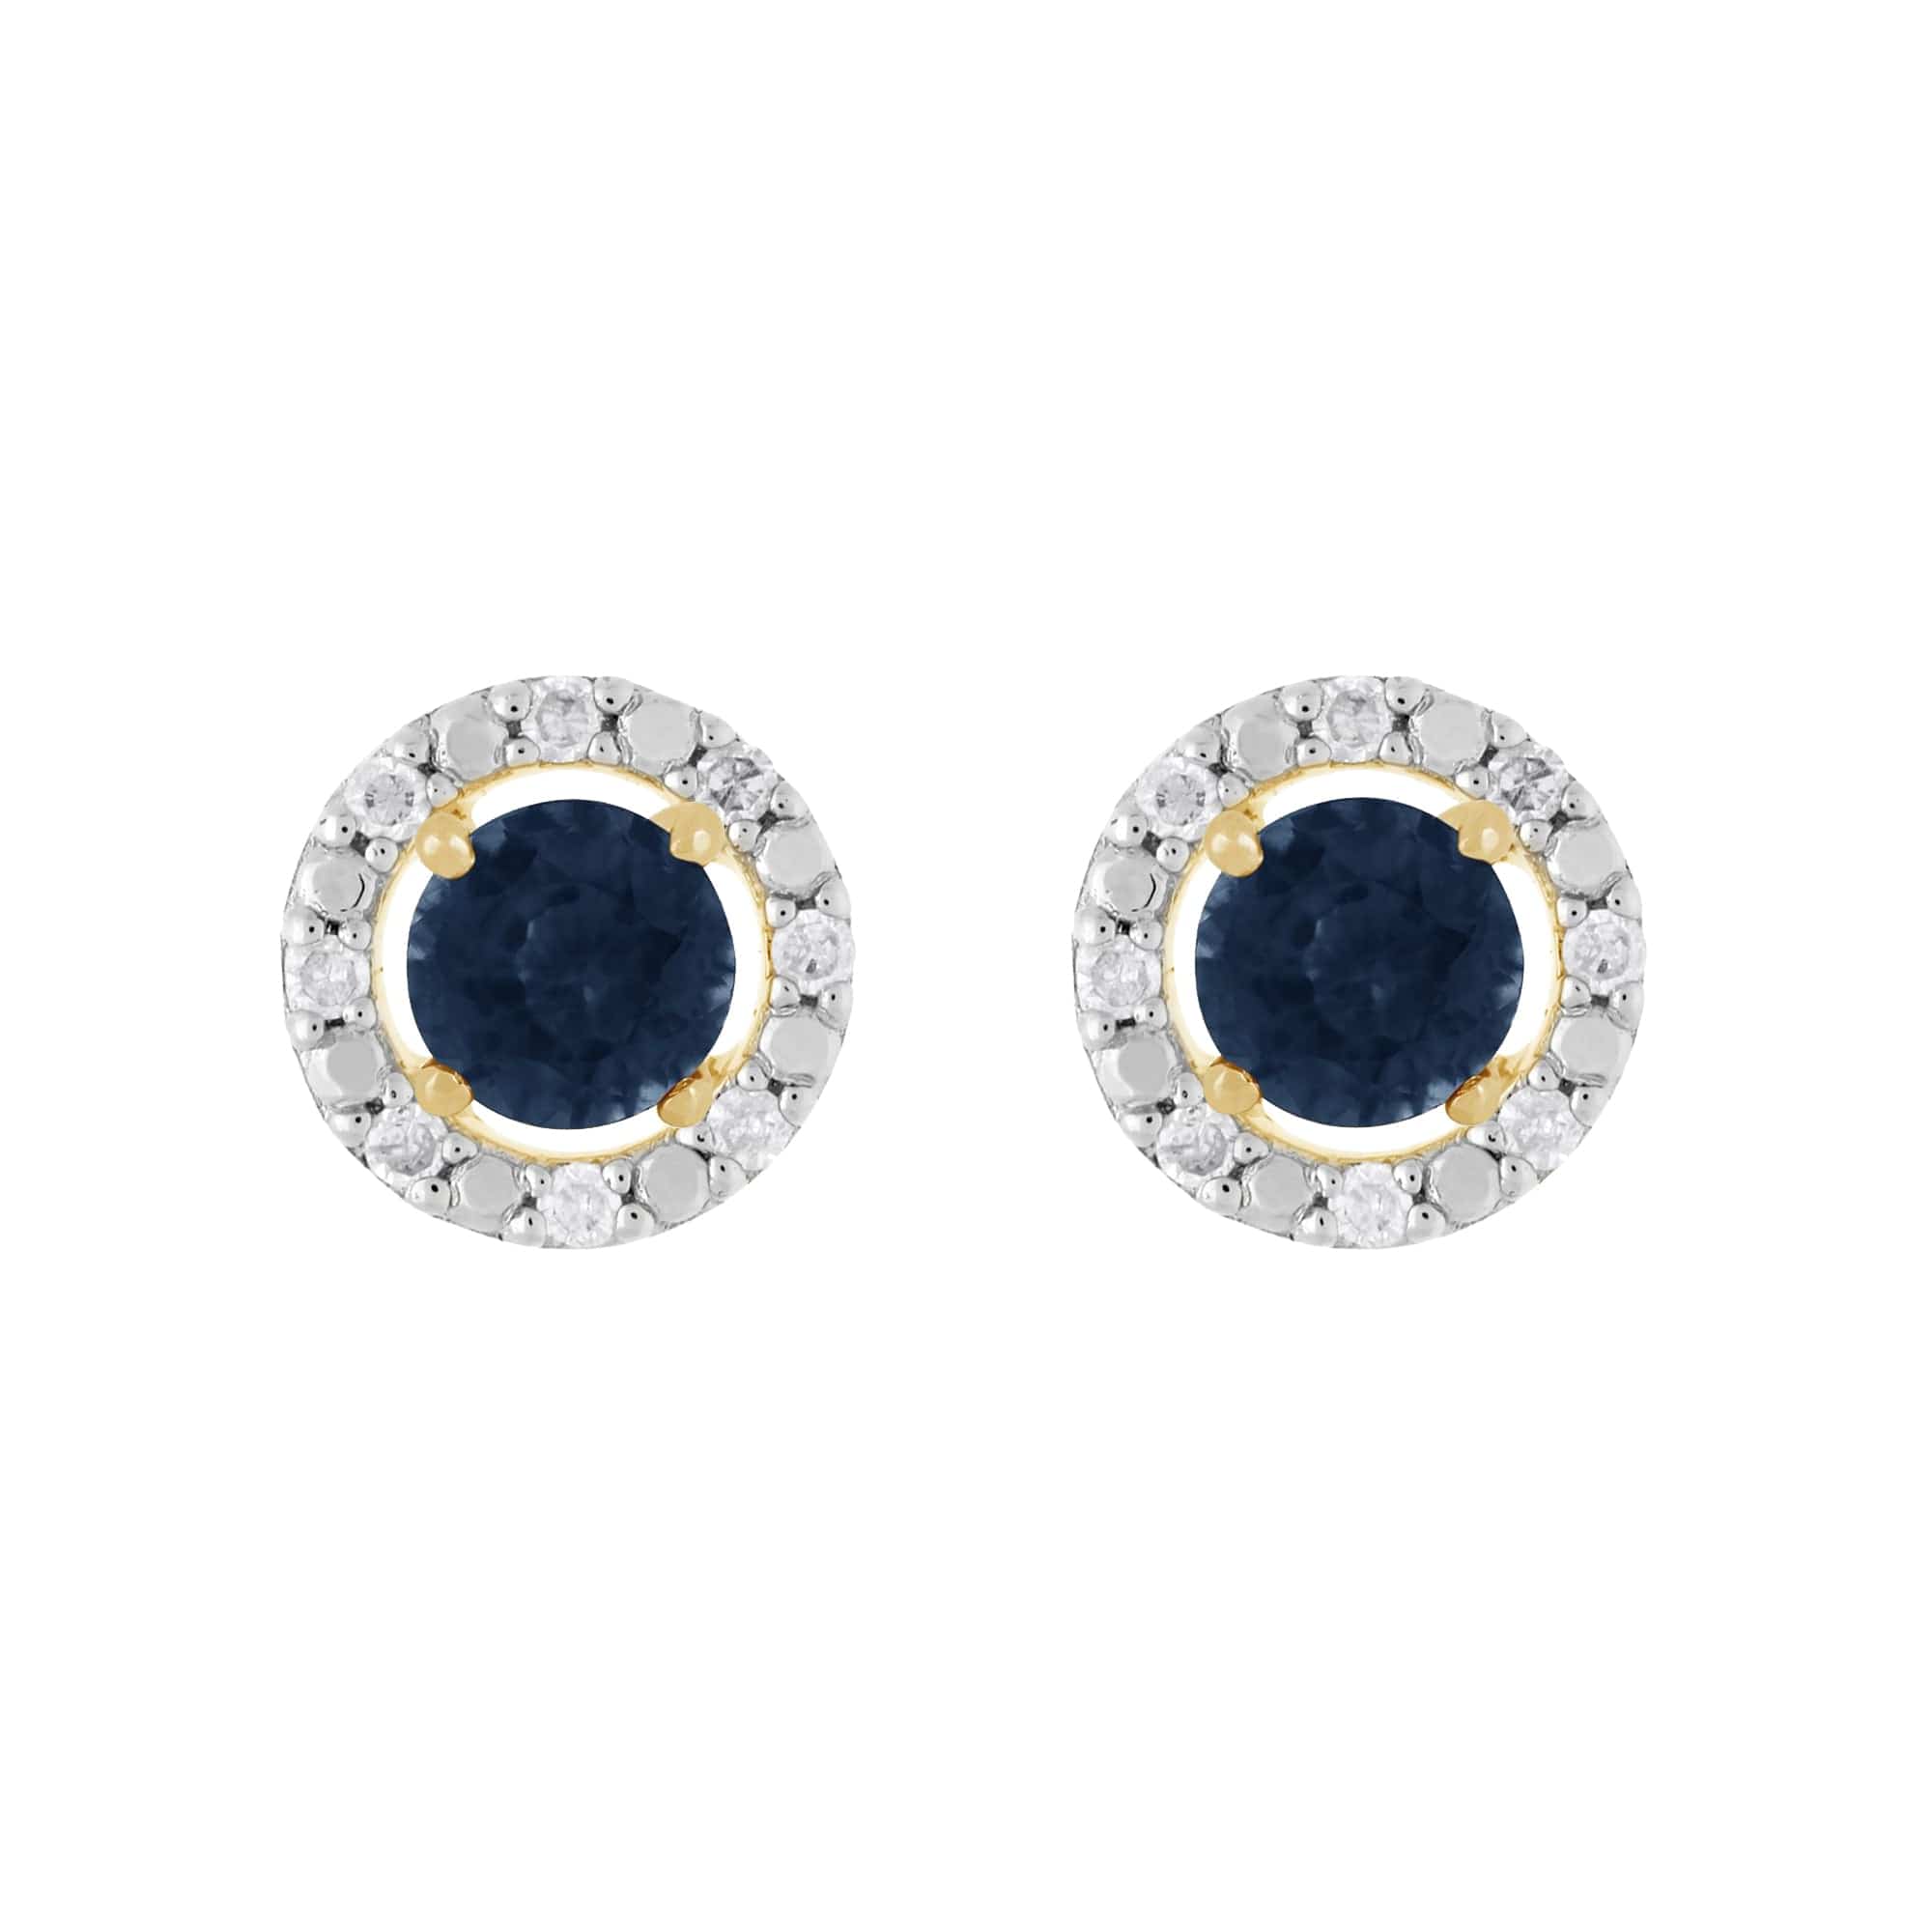 183E0083409-191E0376019 Classic Round Sapphire Stud Earrings with Detachable Diamond Round Earrings Jacket Set in 9ct Yellow Gold 1